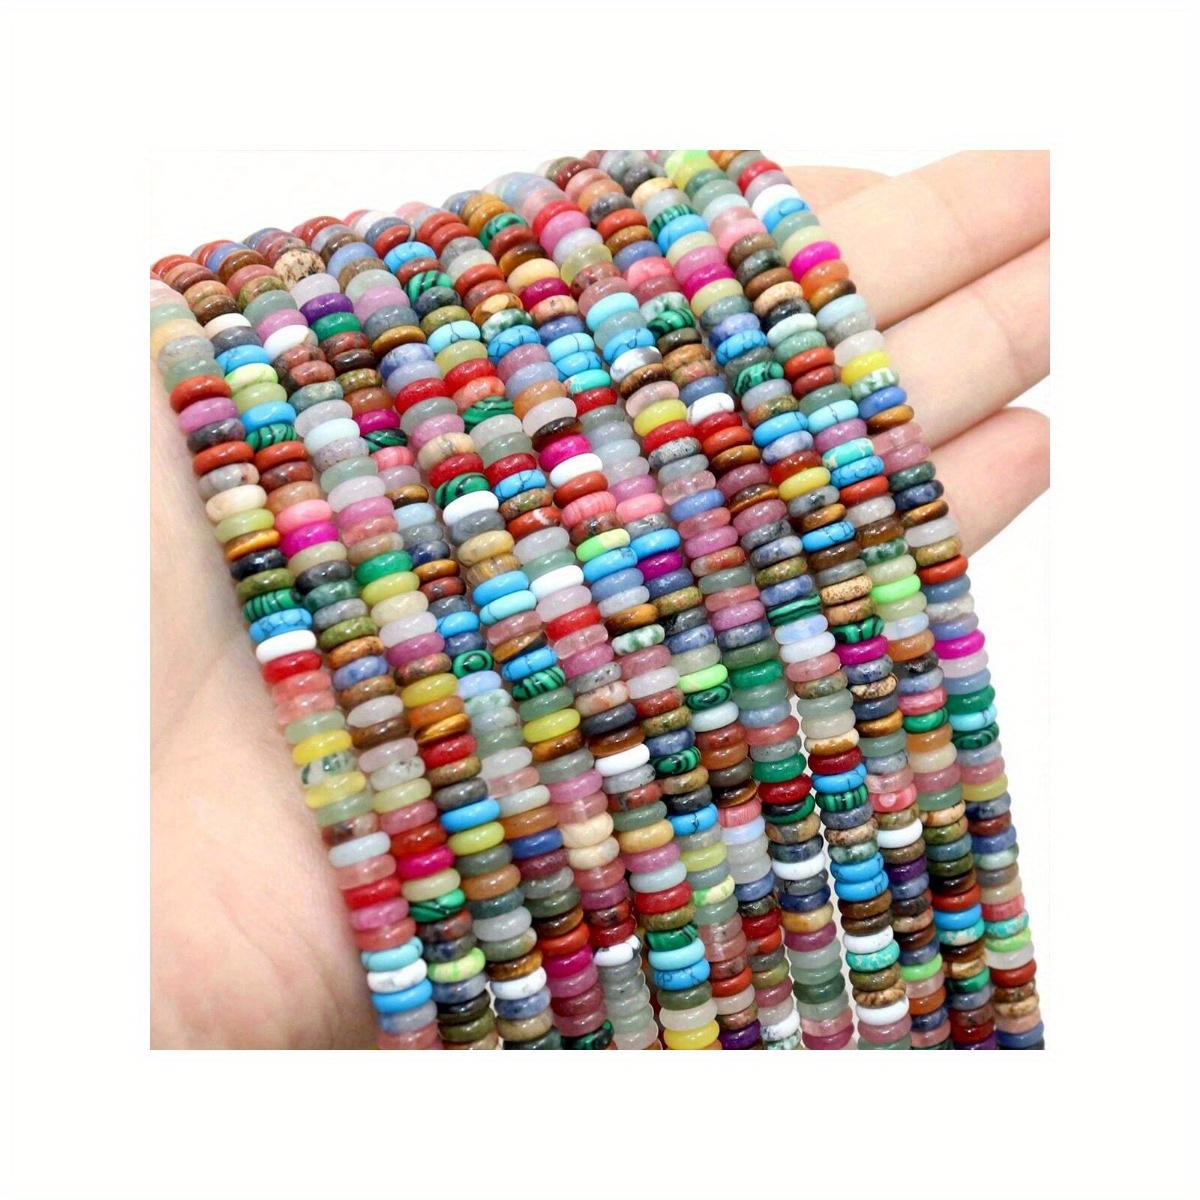 

About 170pcs 2*6mm Mixed Color Natural Stone Spacer Loose Beads For Jewelry Making Diy Special Bracelet Necklace Semi-finished Accessories